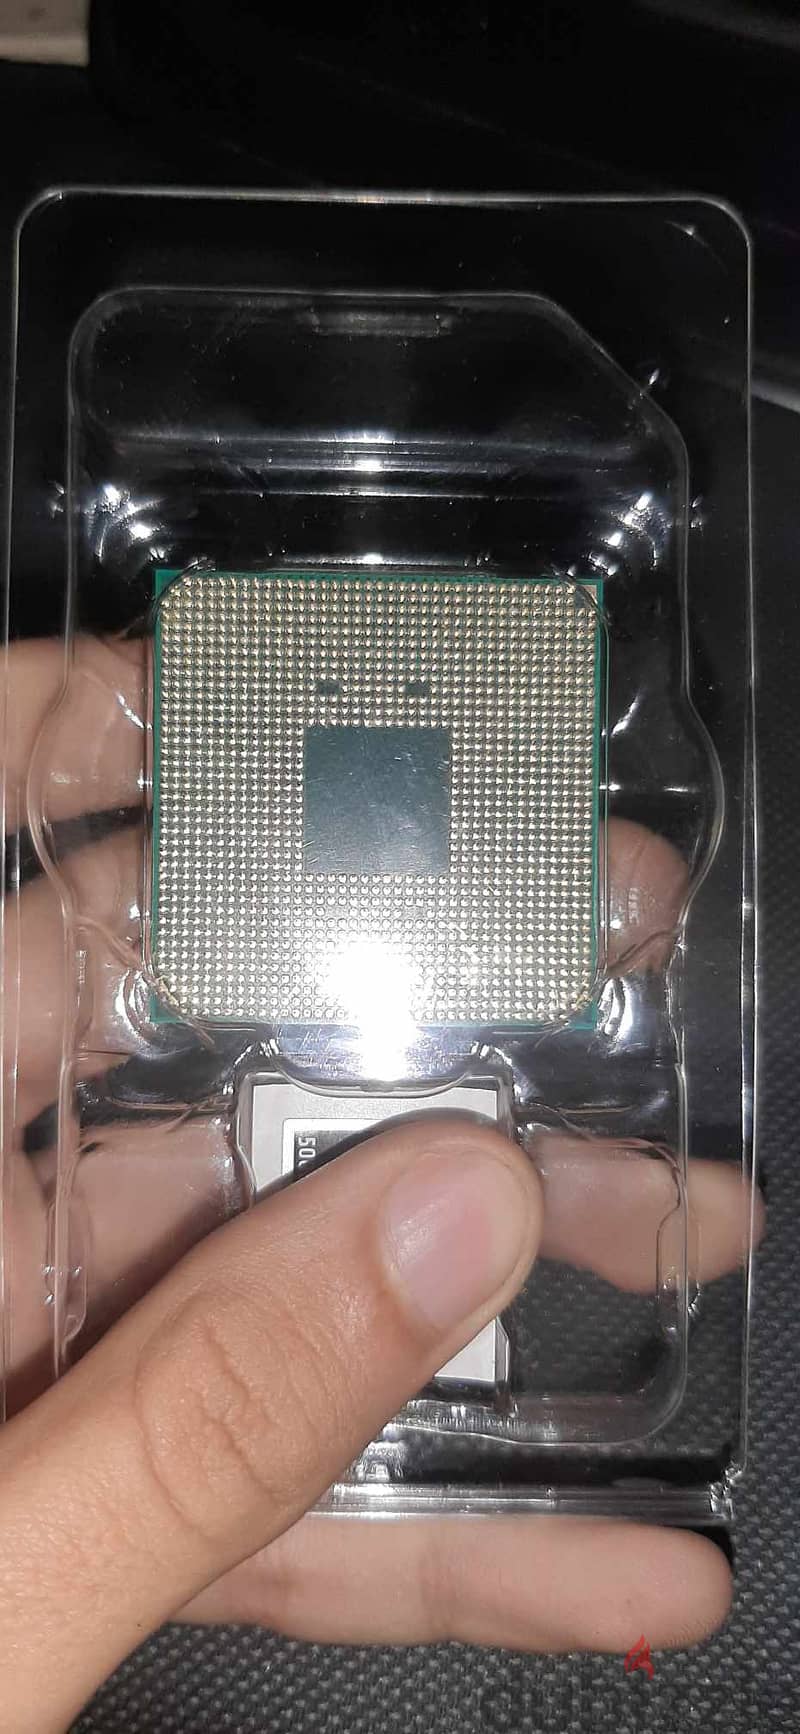 RYZEN 5 1600AF Processor with Wraith Stealth Cooler 2